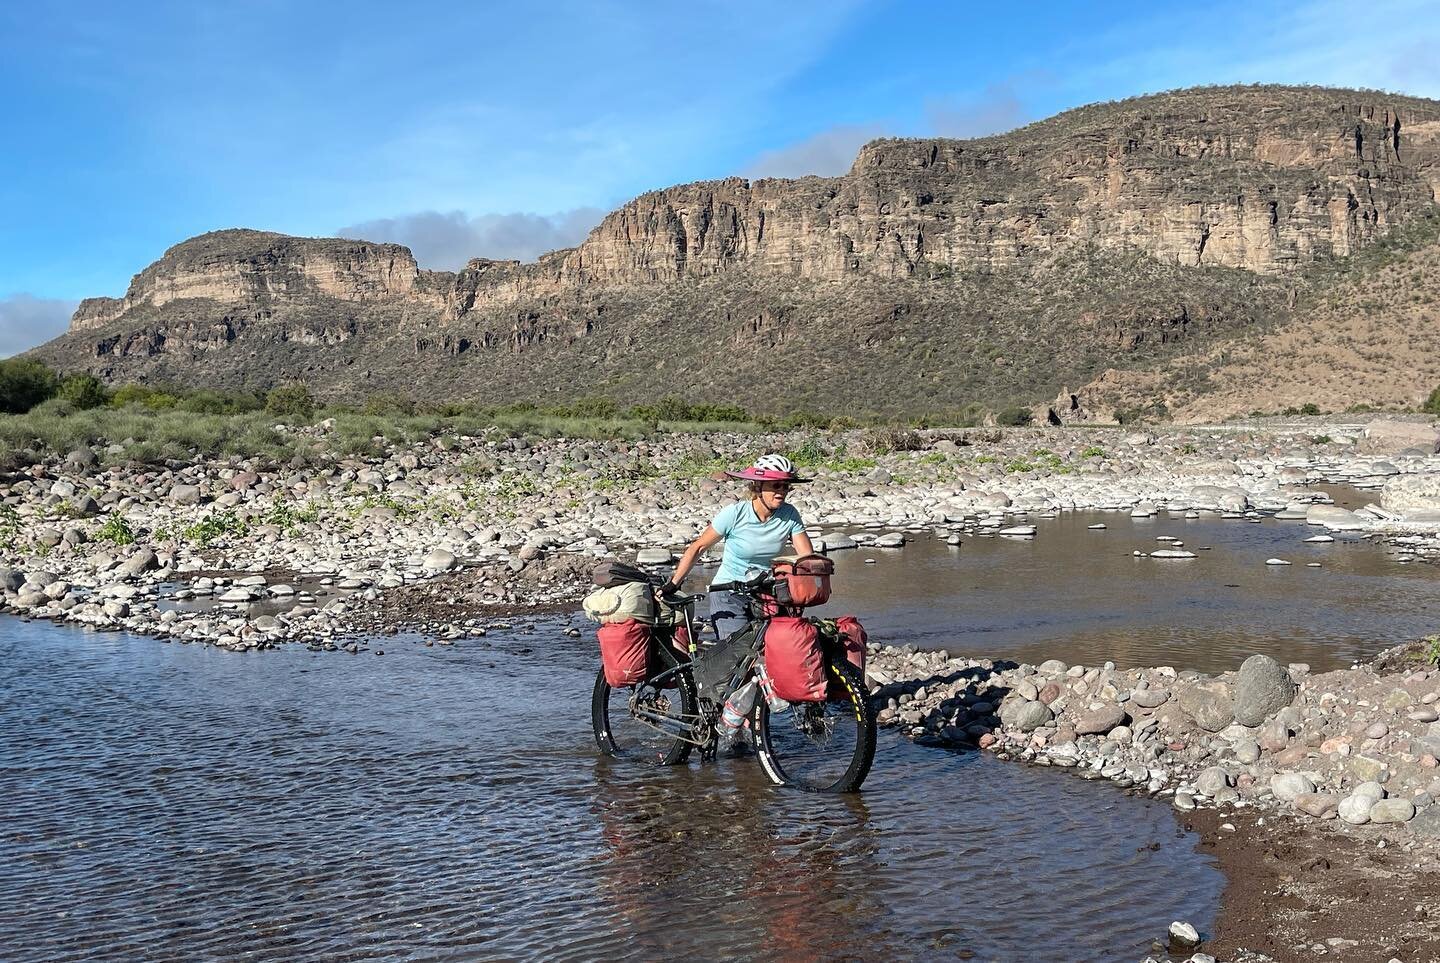 We finished section 13 of the Baja Divide bikepacking route.  Some have called this one of the most difficult sections of the route.  We had heard in advance that there were &ldquo;a lot of water crossings&rdquo;. We wondered what that meant since no